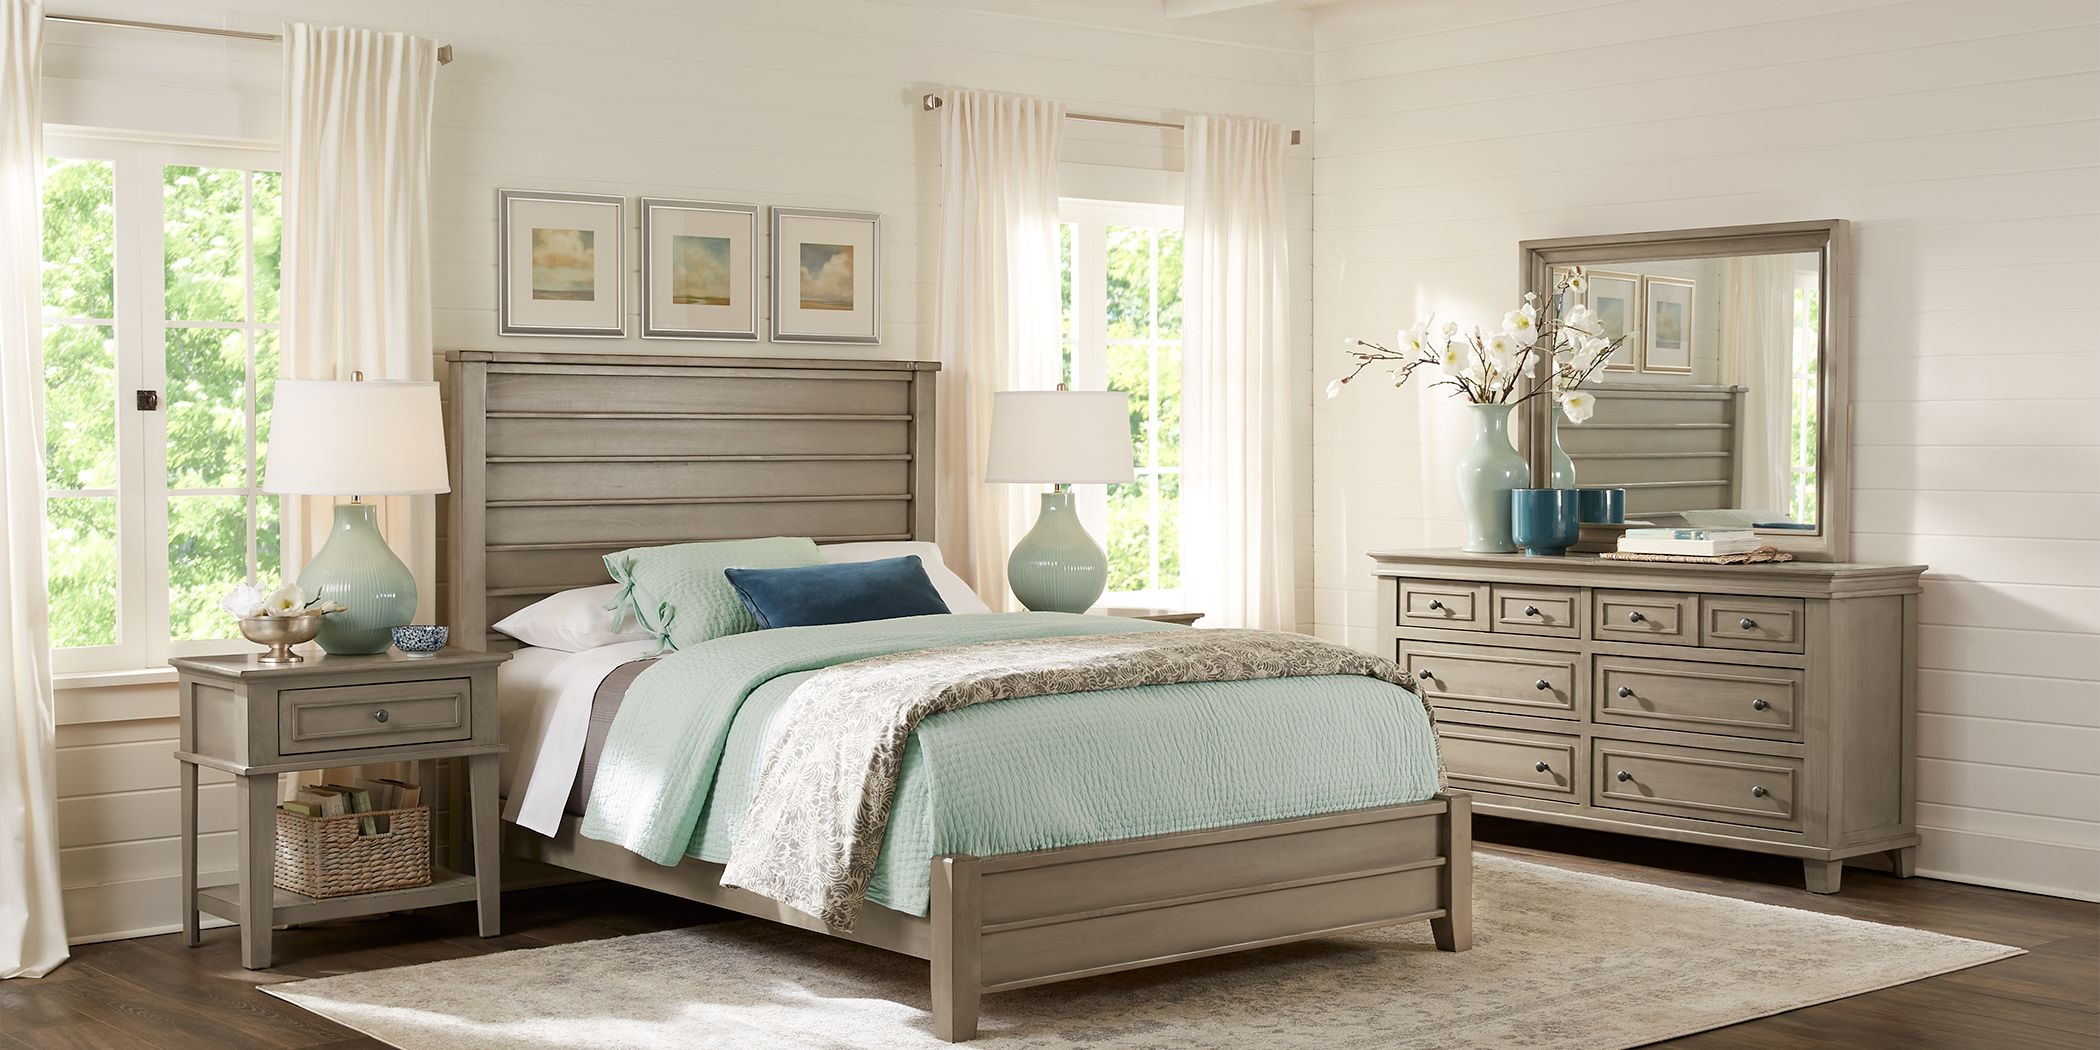 Storage Queen Size Beds Frames, Hillary Bookcase Bedroom With Underbed Storage Drawers Warm Brown